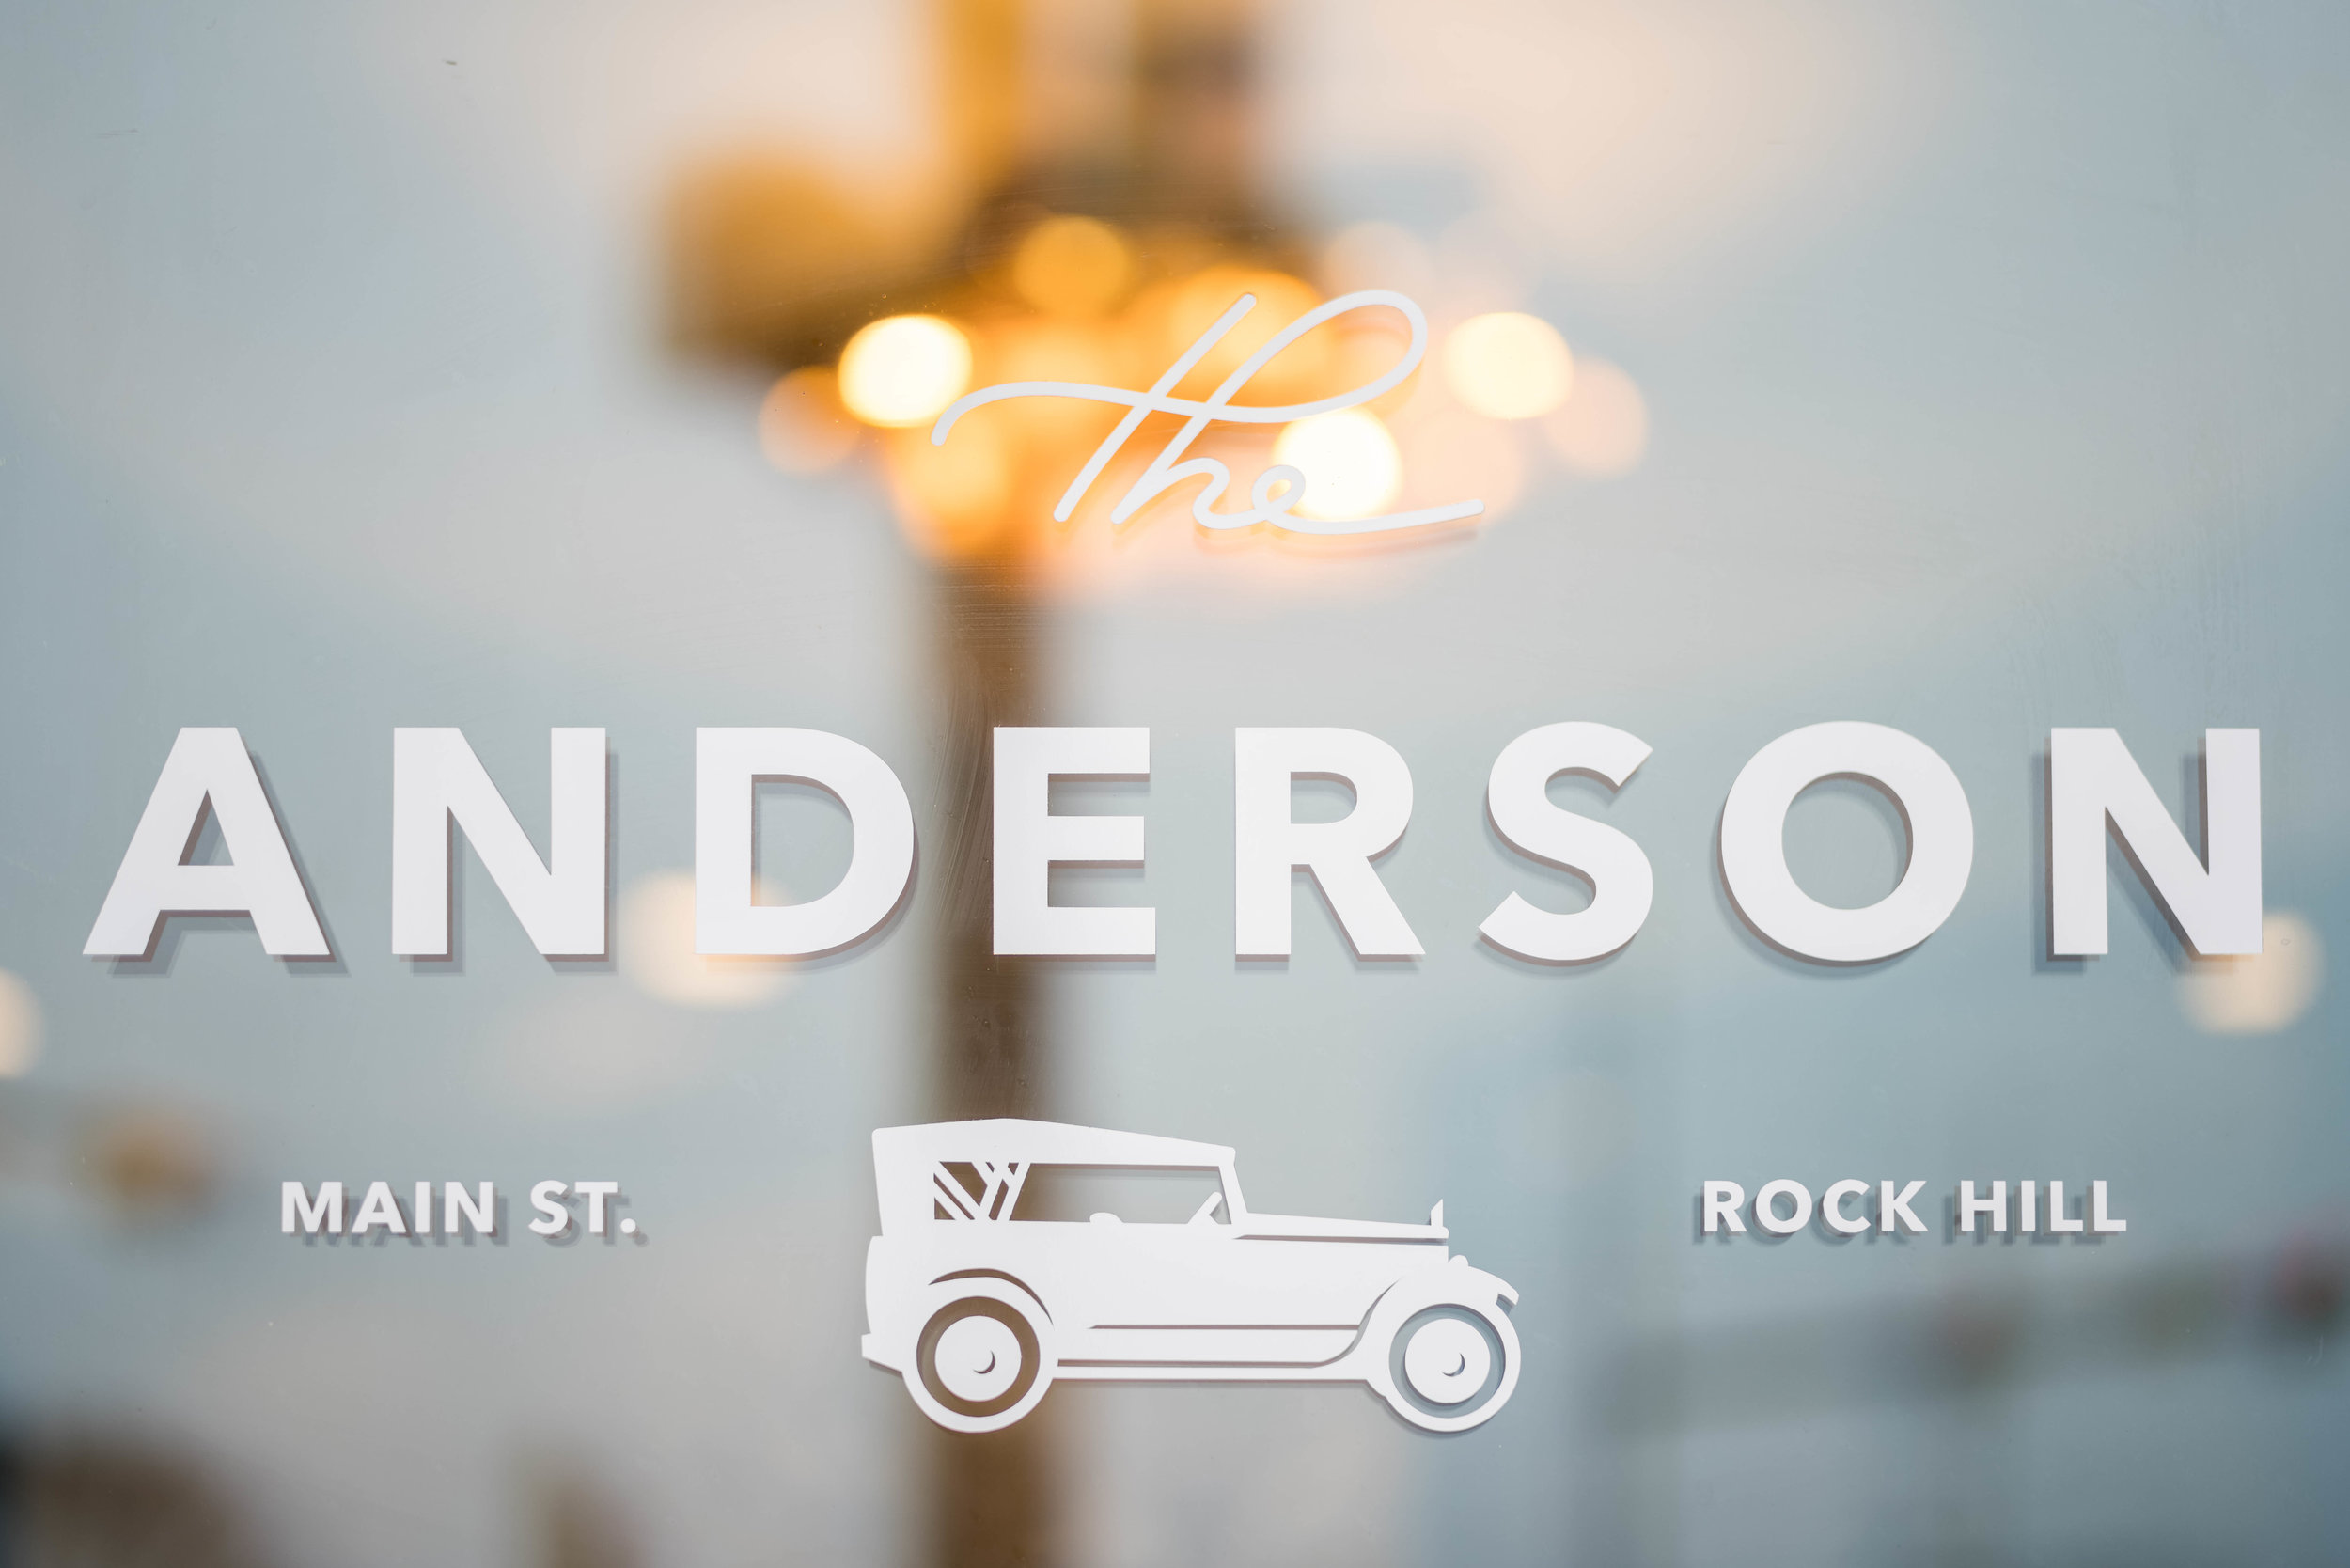 The Anderson-50.jpg